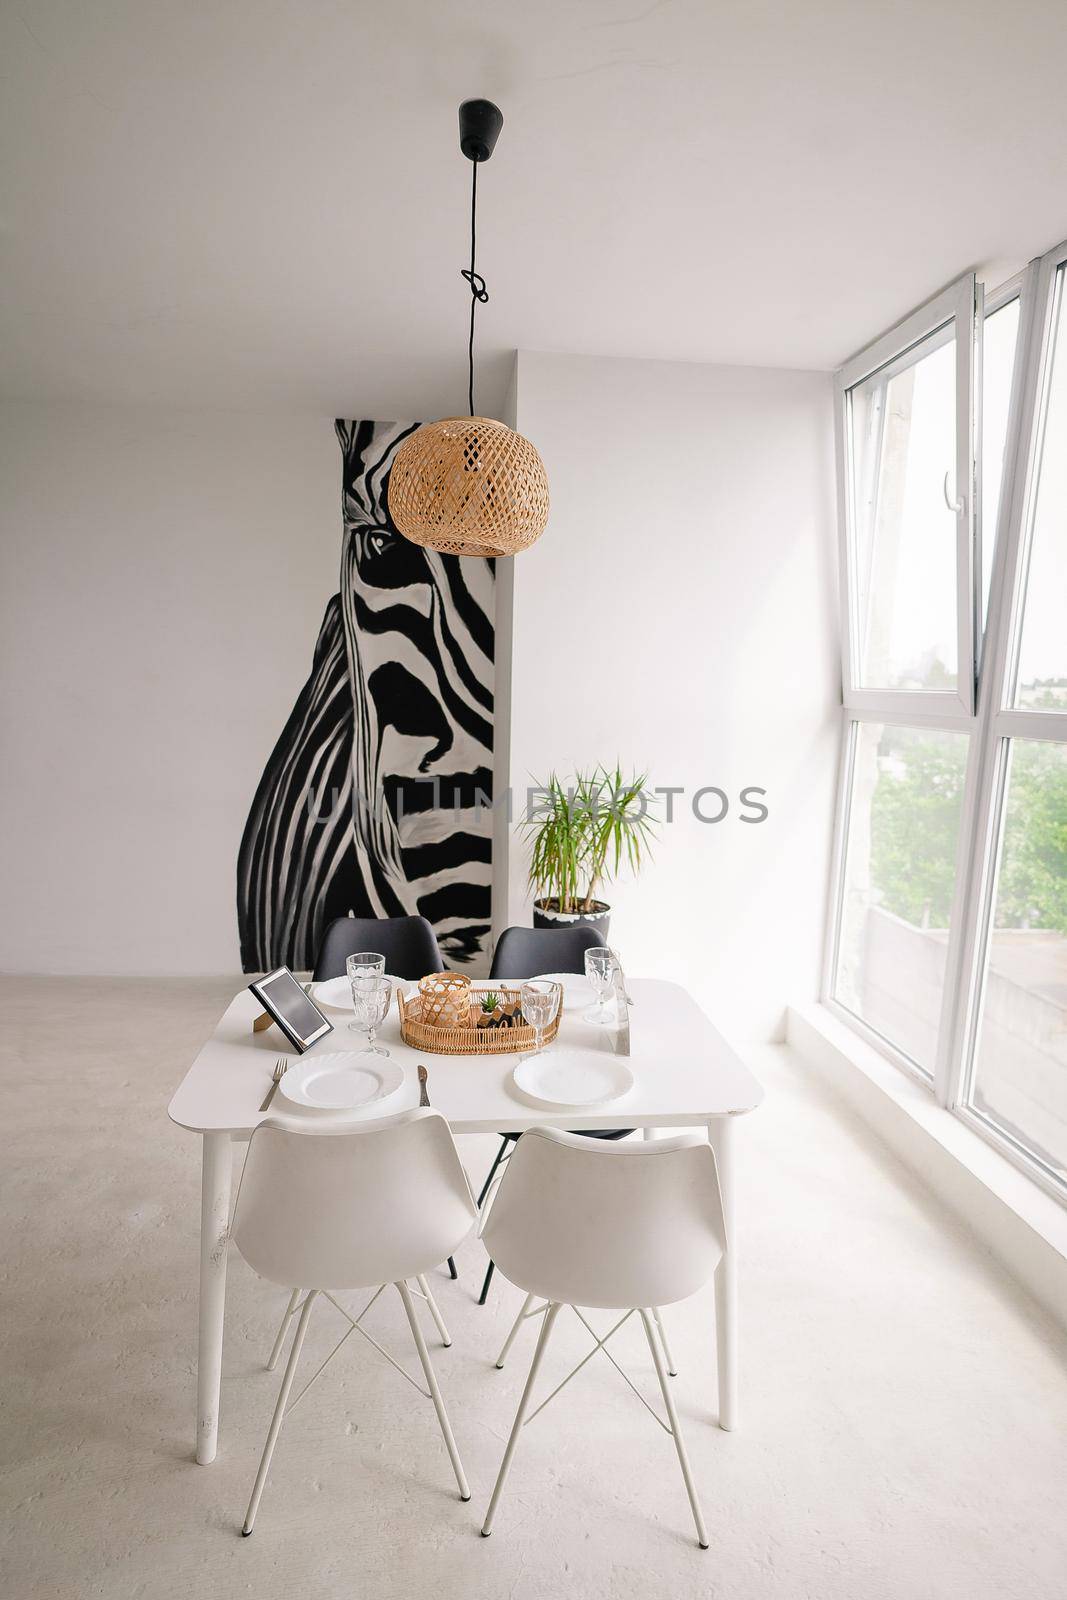 Interior Design of a Light Dining Room in a Minimalist Style with a Square Wooden Server White Table, Black and White Chairs, with Wicker Decorations on the Chandelier and on the Table, with a Large Window and a Huge Zebra Picture on the Wall. High quality photo